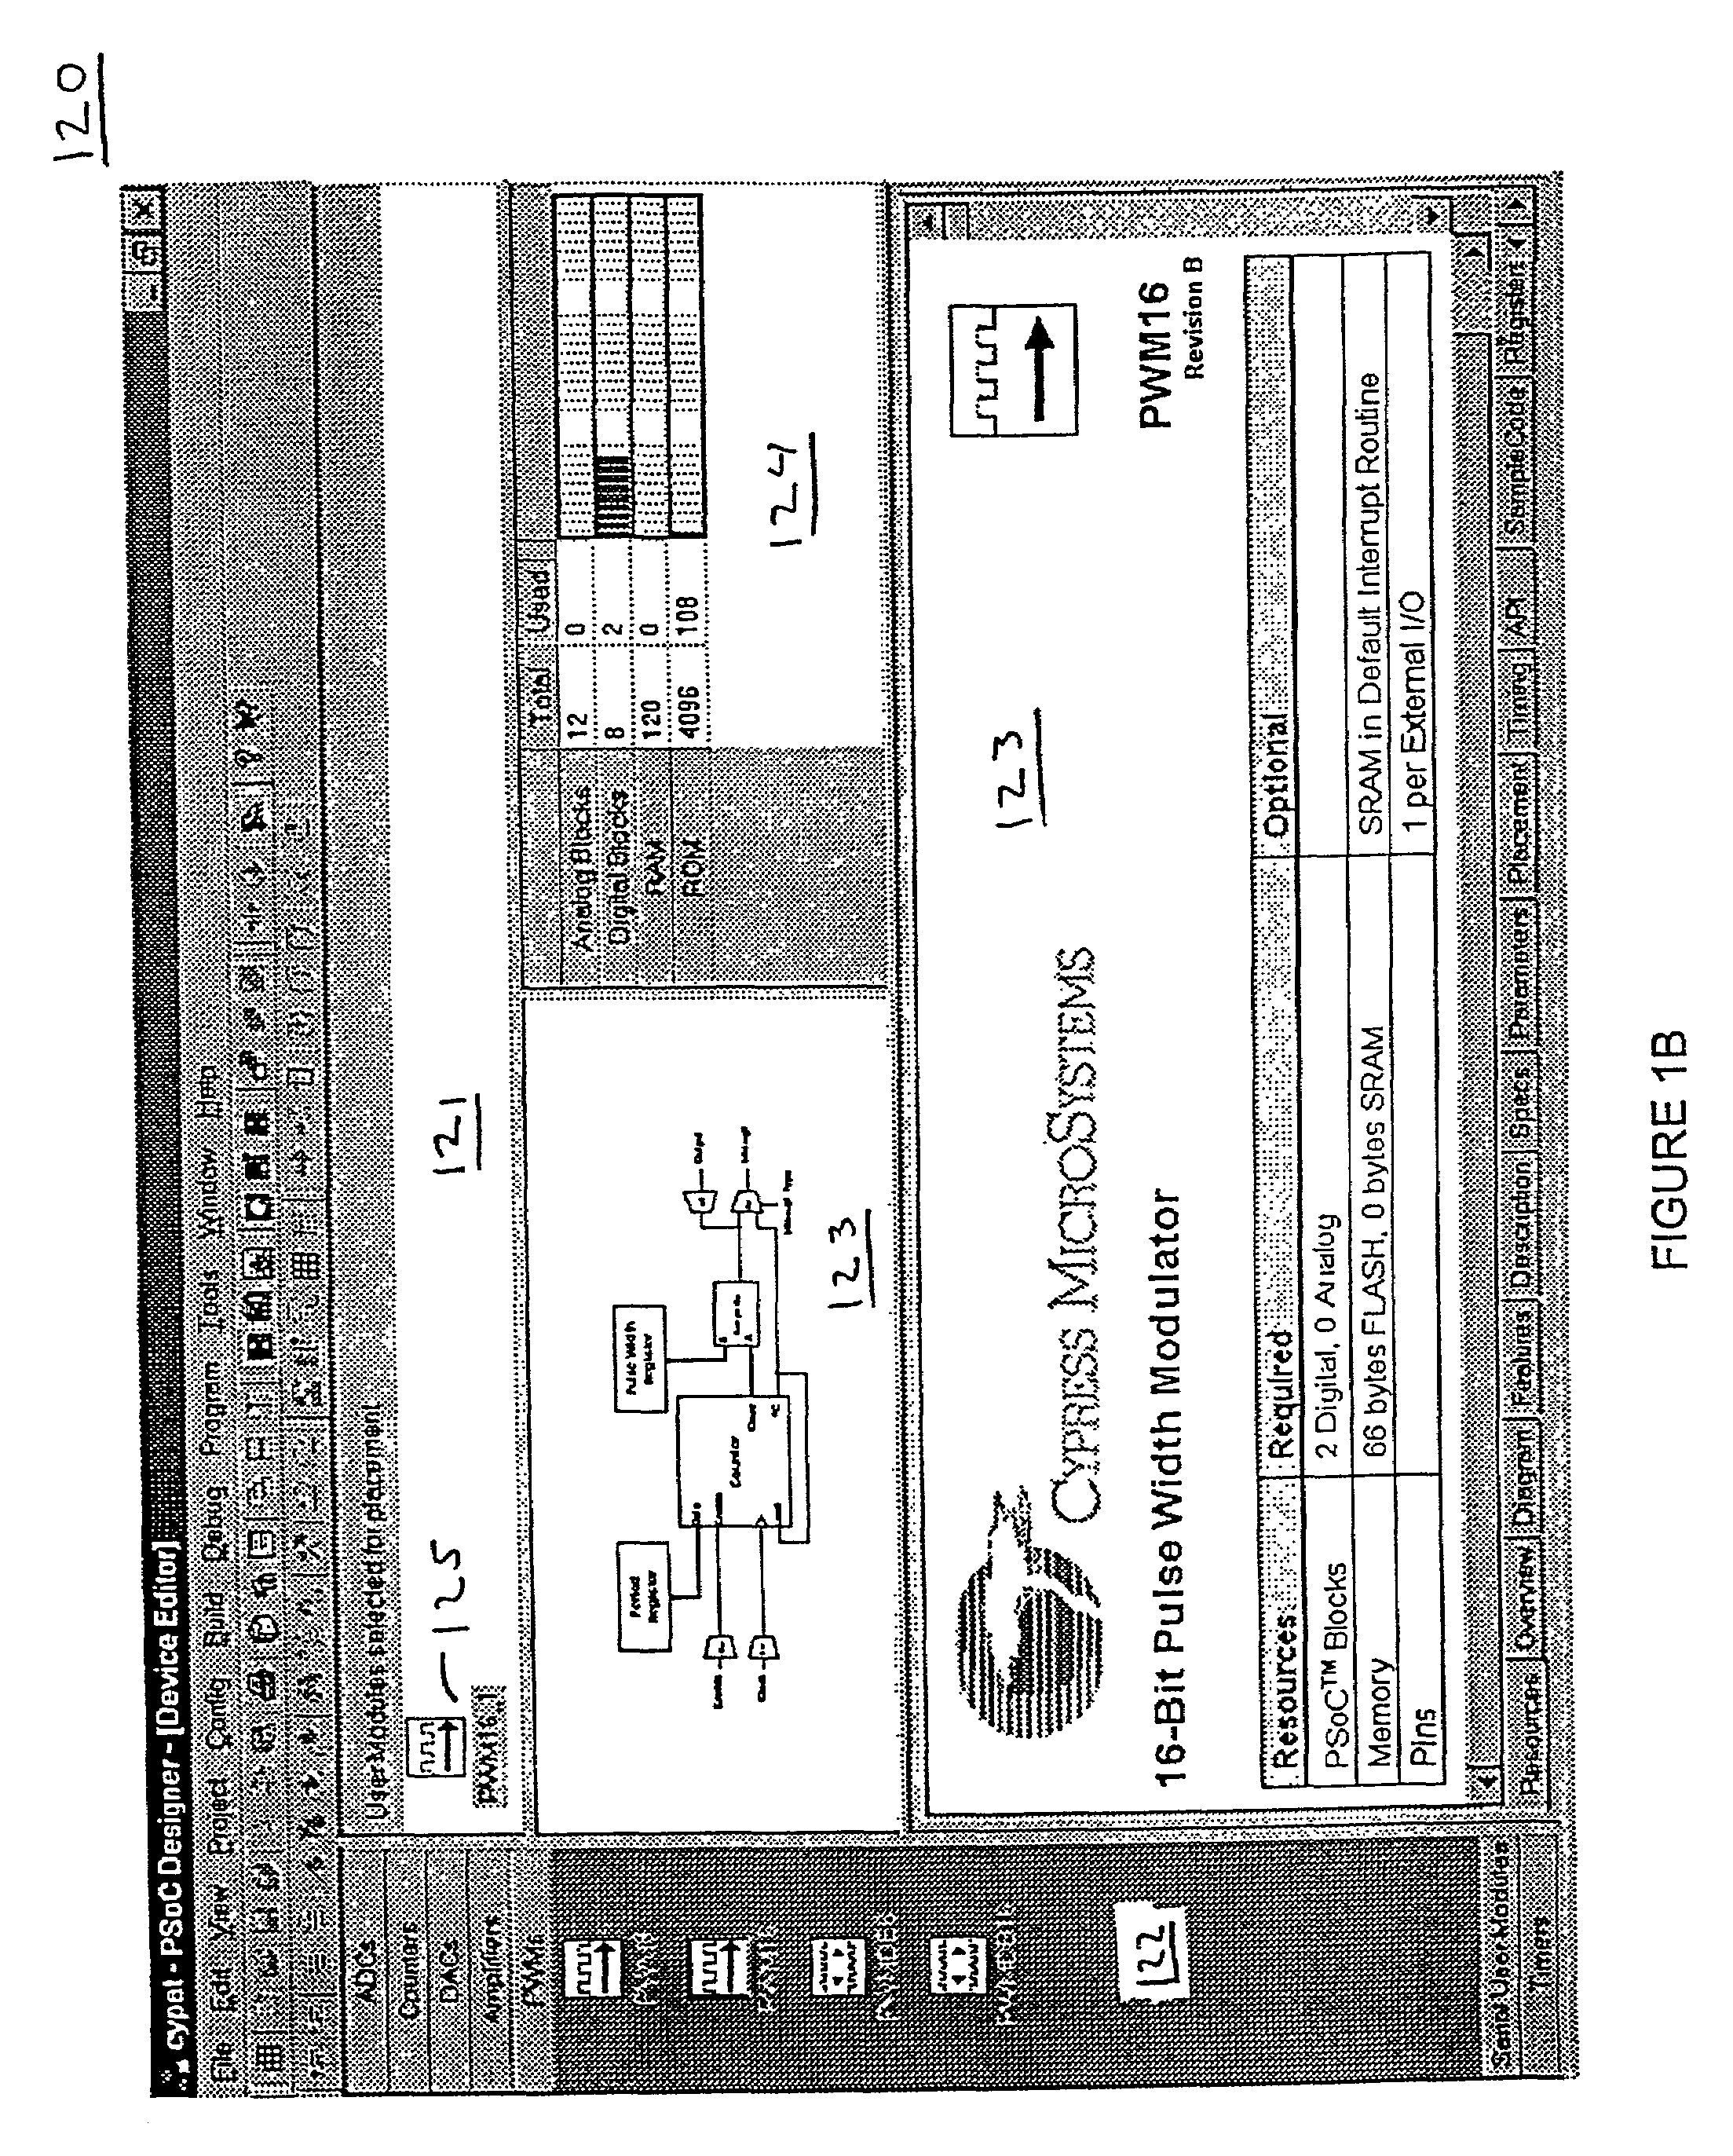 System and method for software testing with extensible markup language and extensible stylesheet language